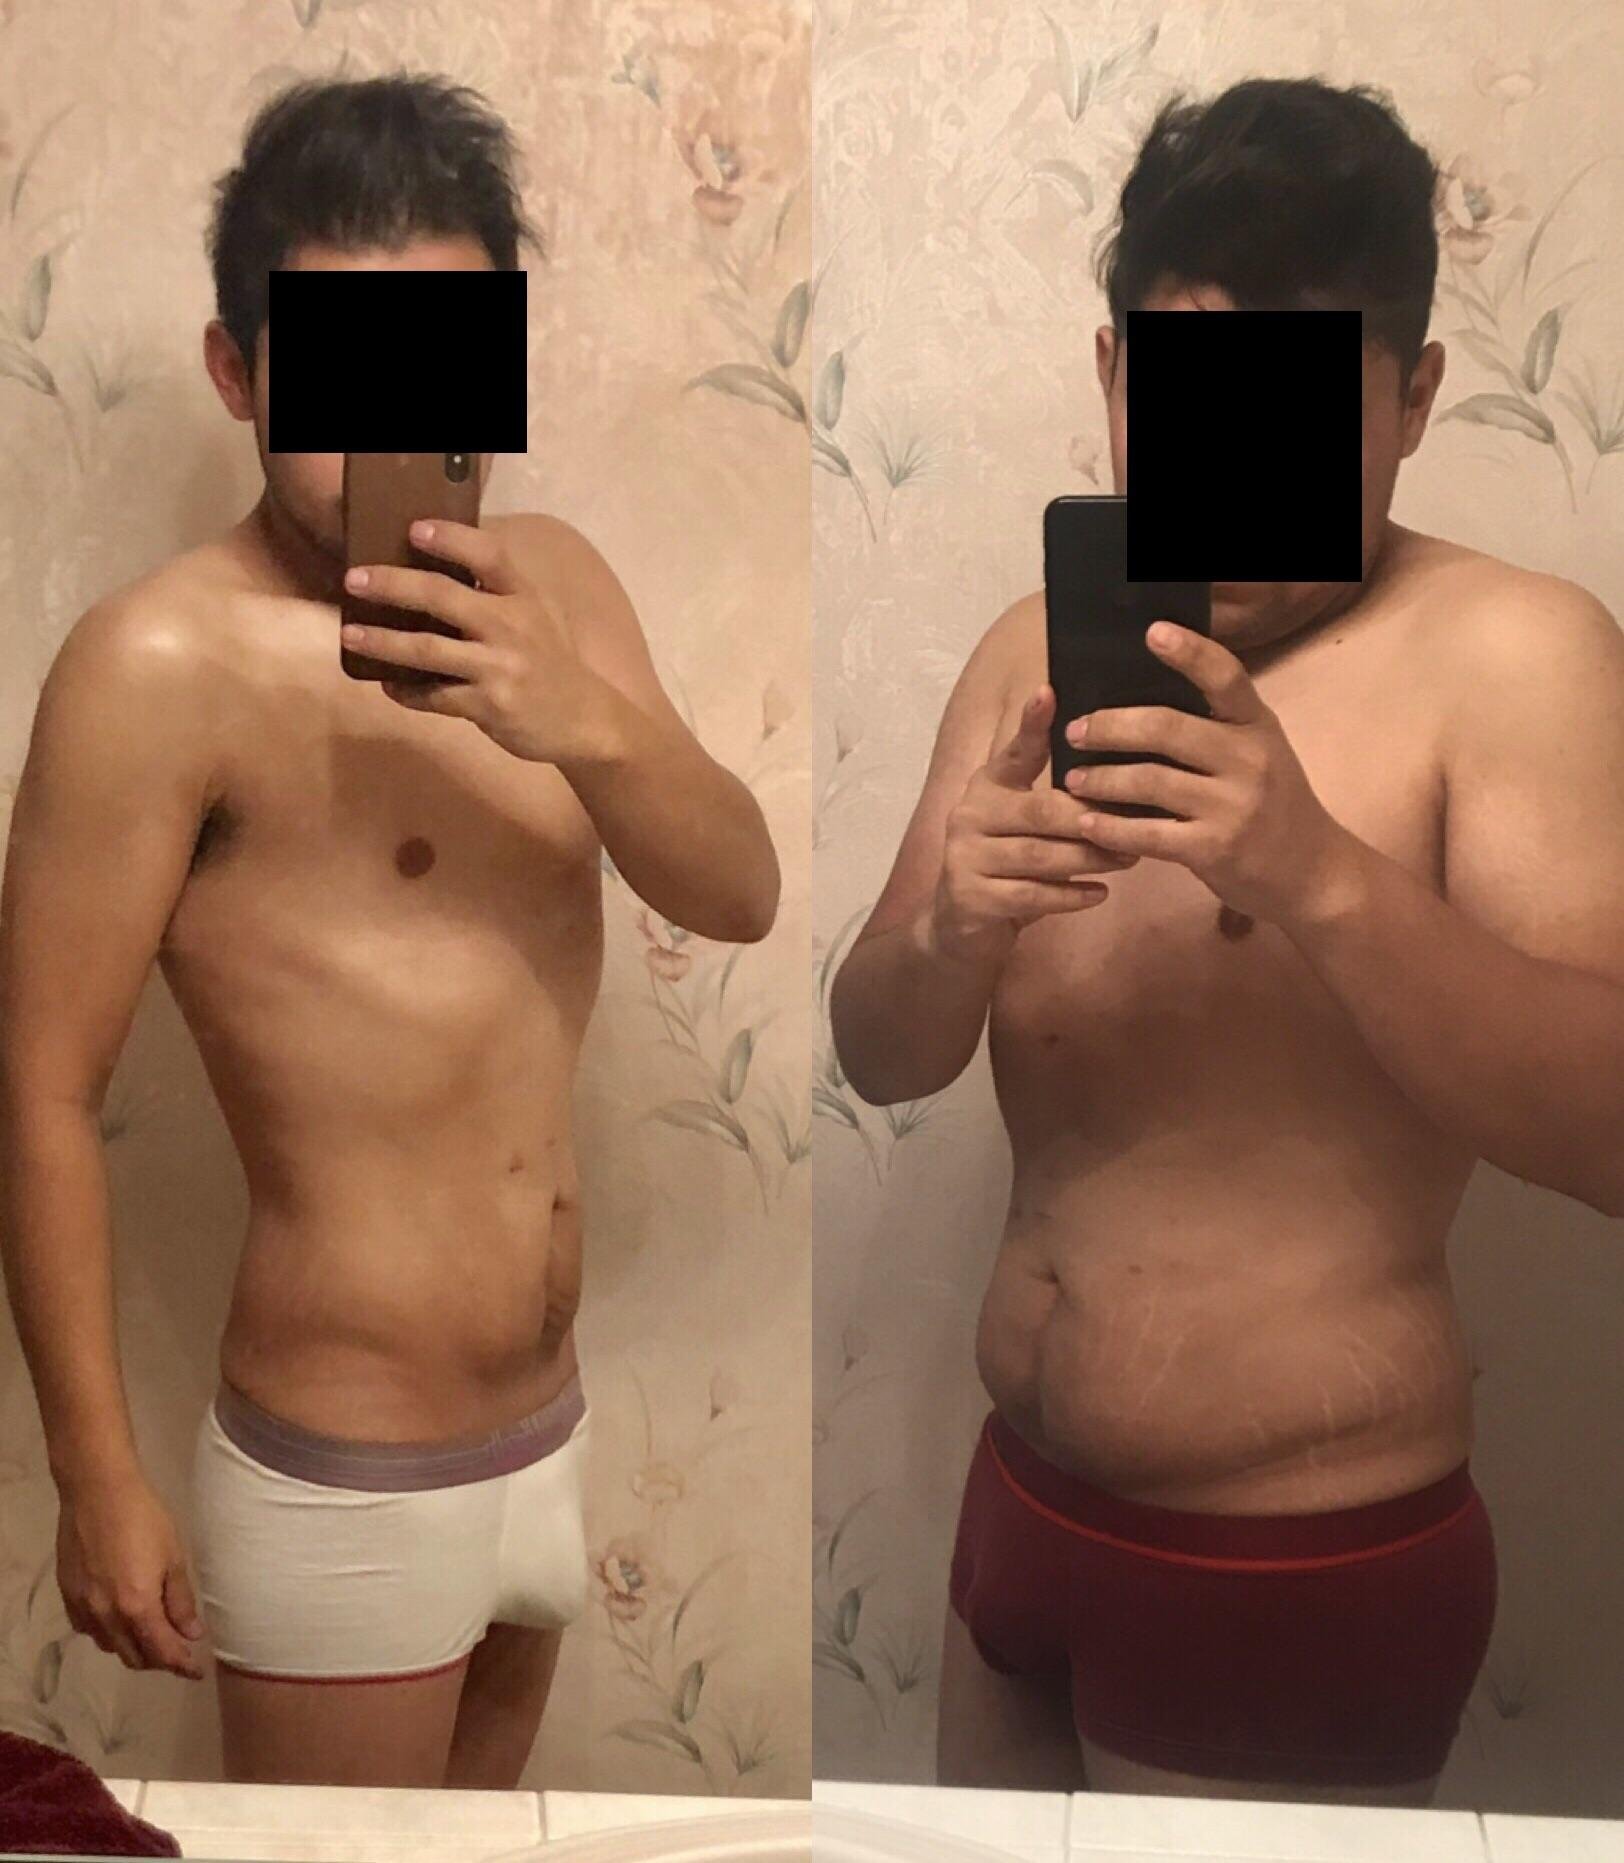 M / 5’ 7” / 148lbs [Update] -82lbs and counting.